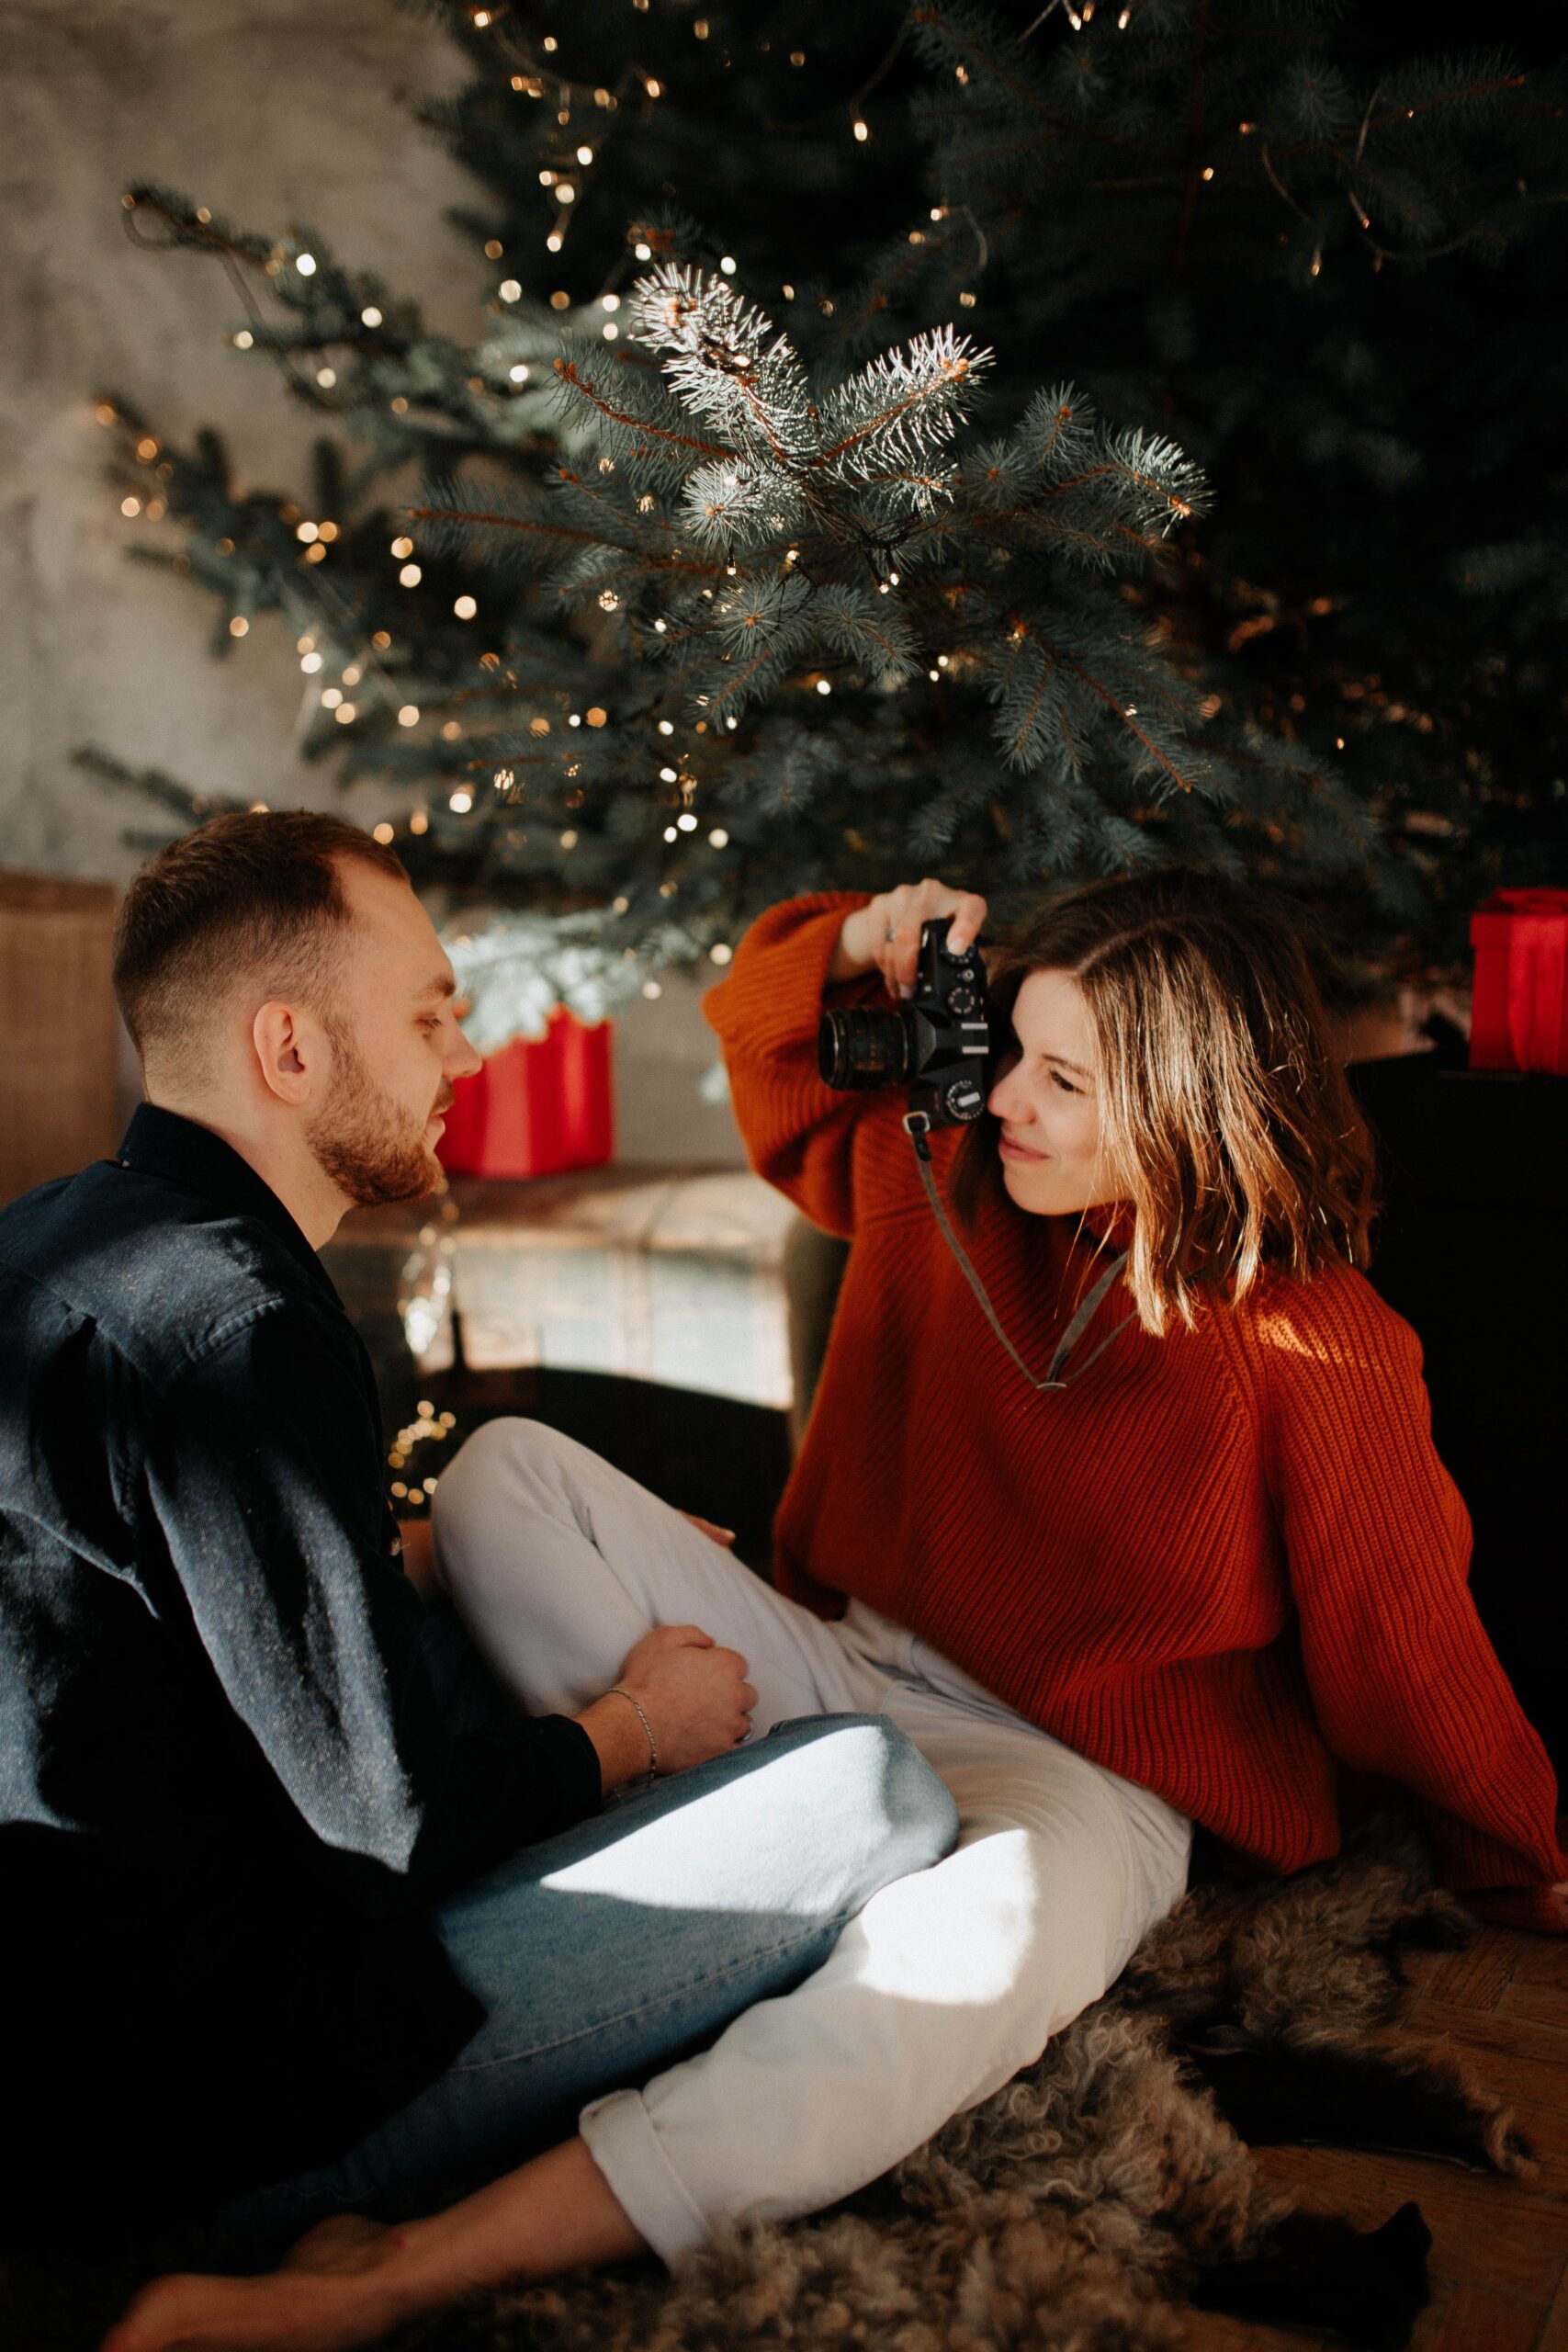 Romantic Merry Christmas Wishes for Boyfriend